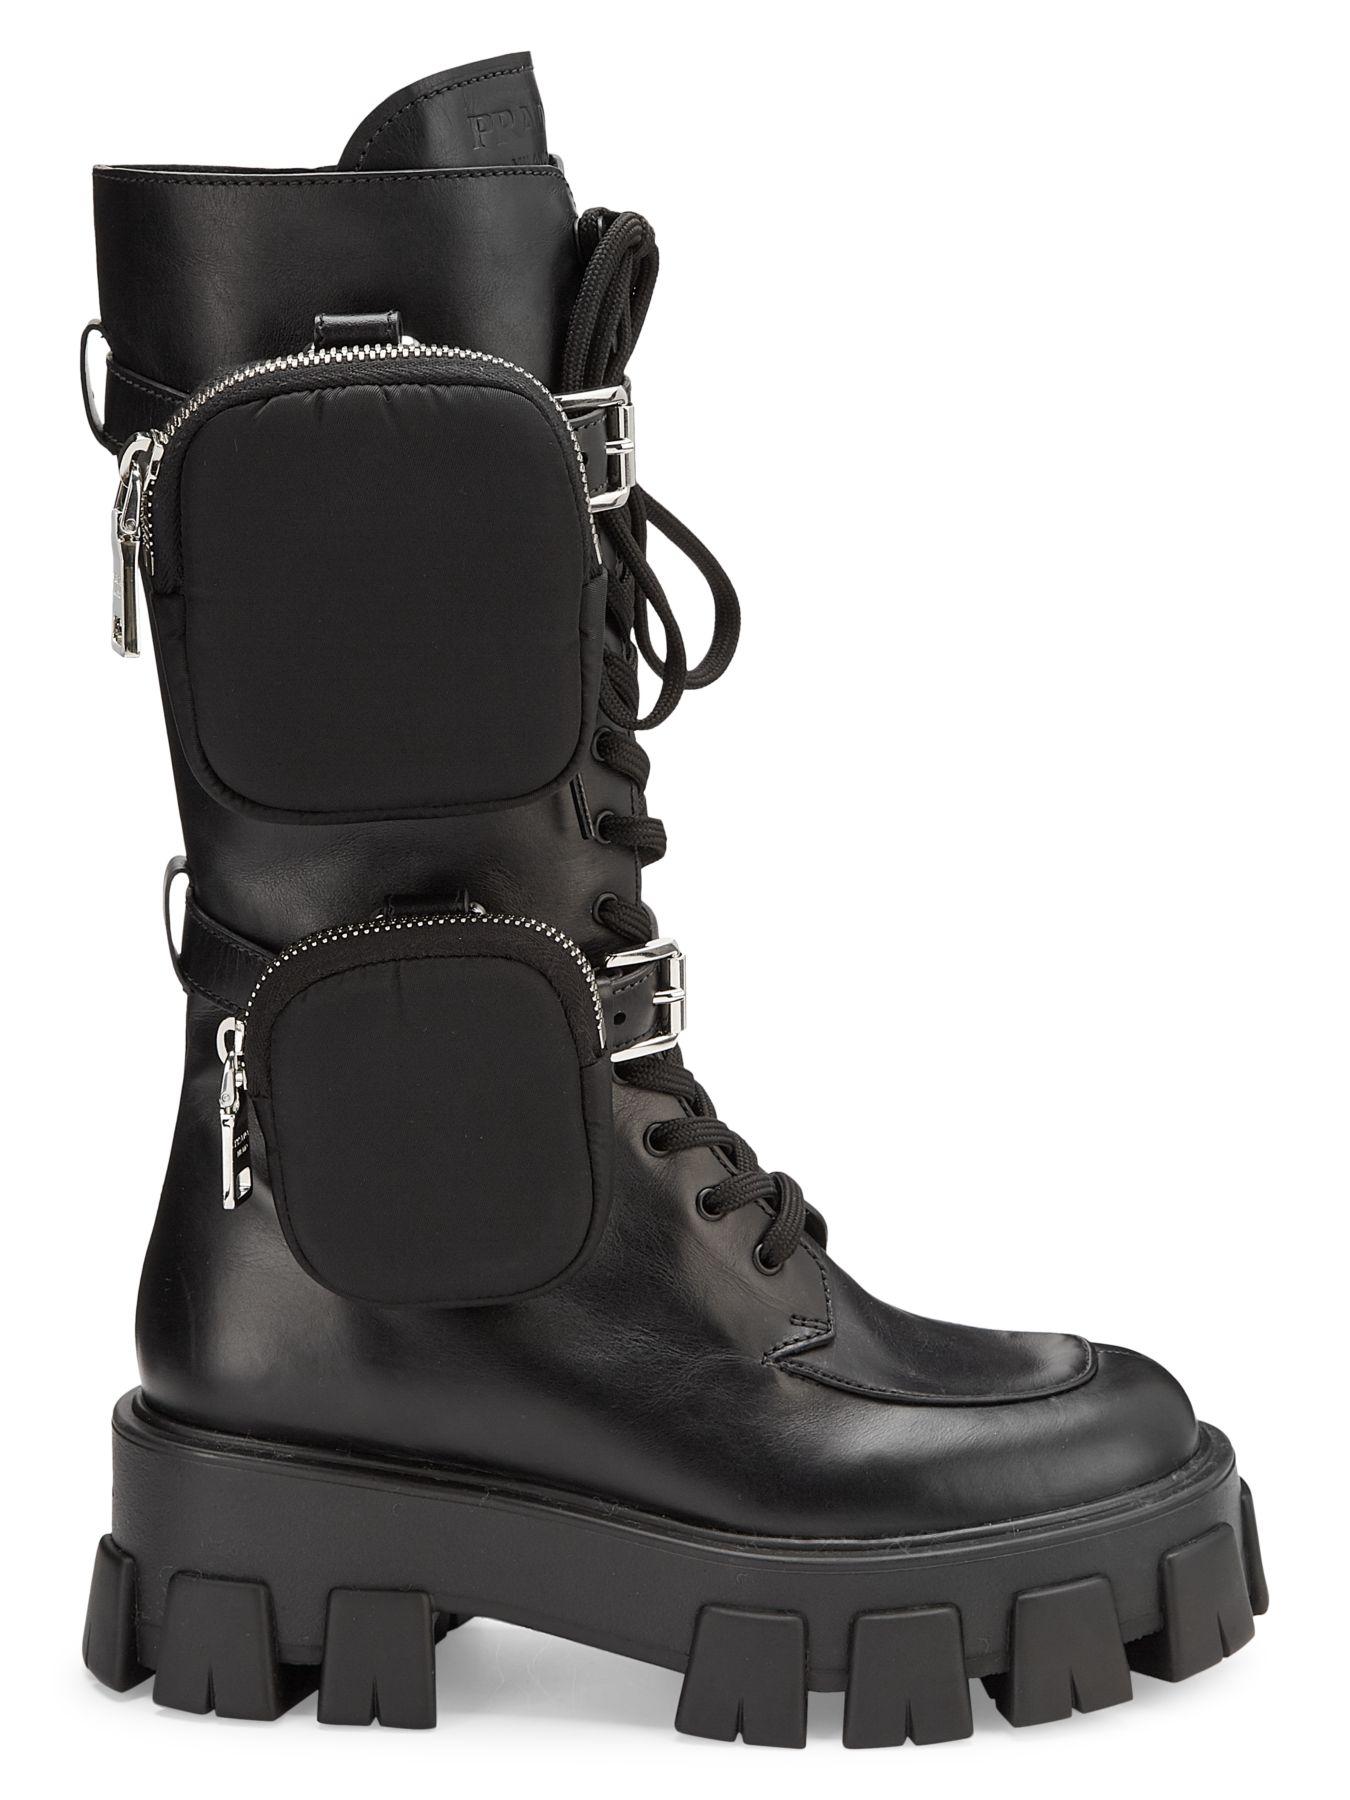 Prada Chunky Leather Tall Combat Boots in Nero (Black) - Lyst